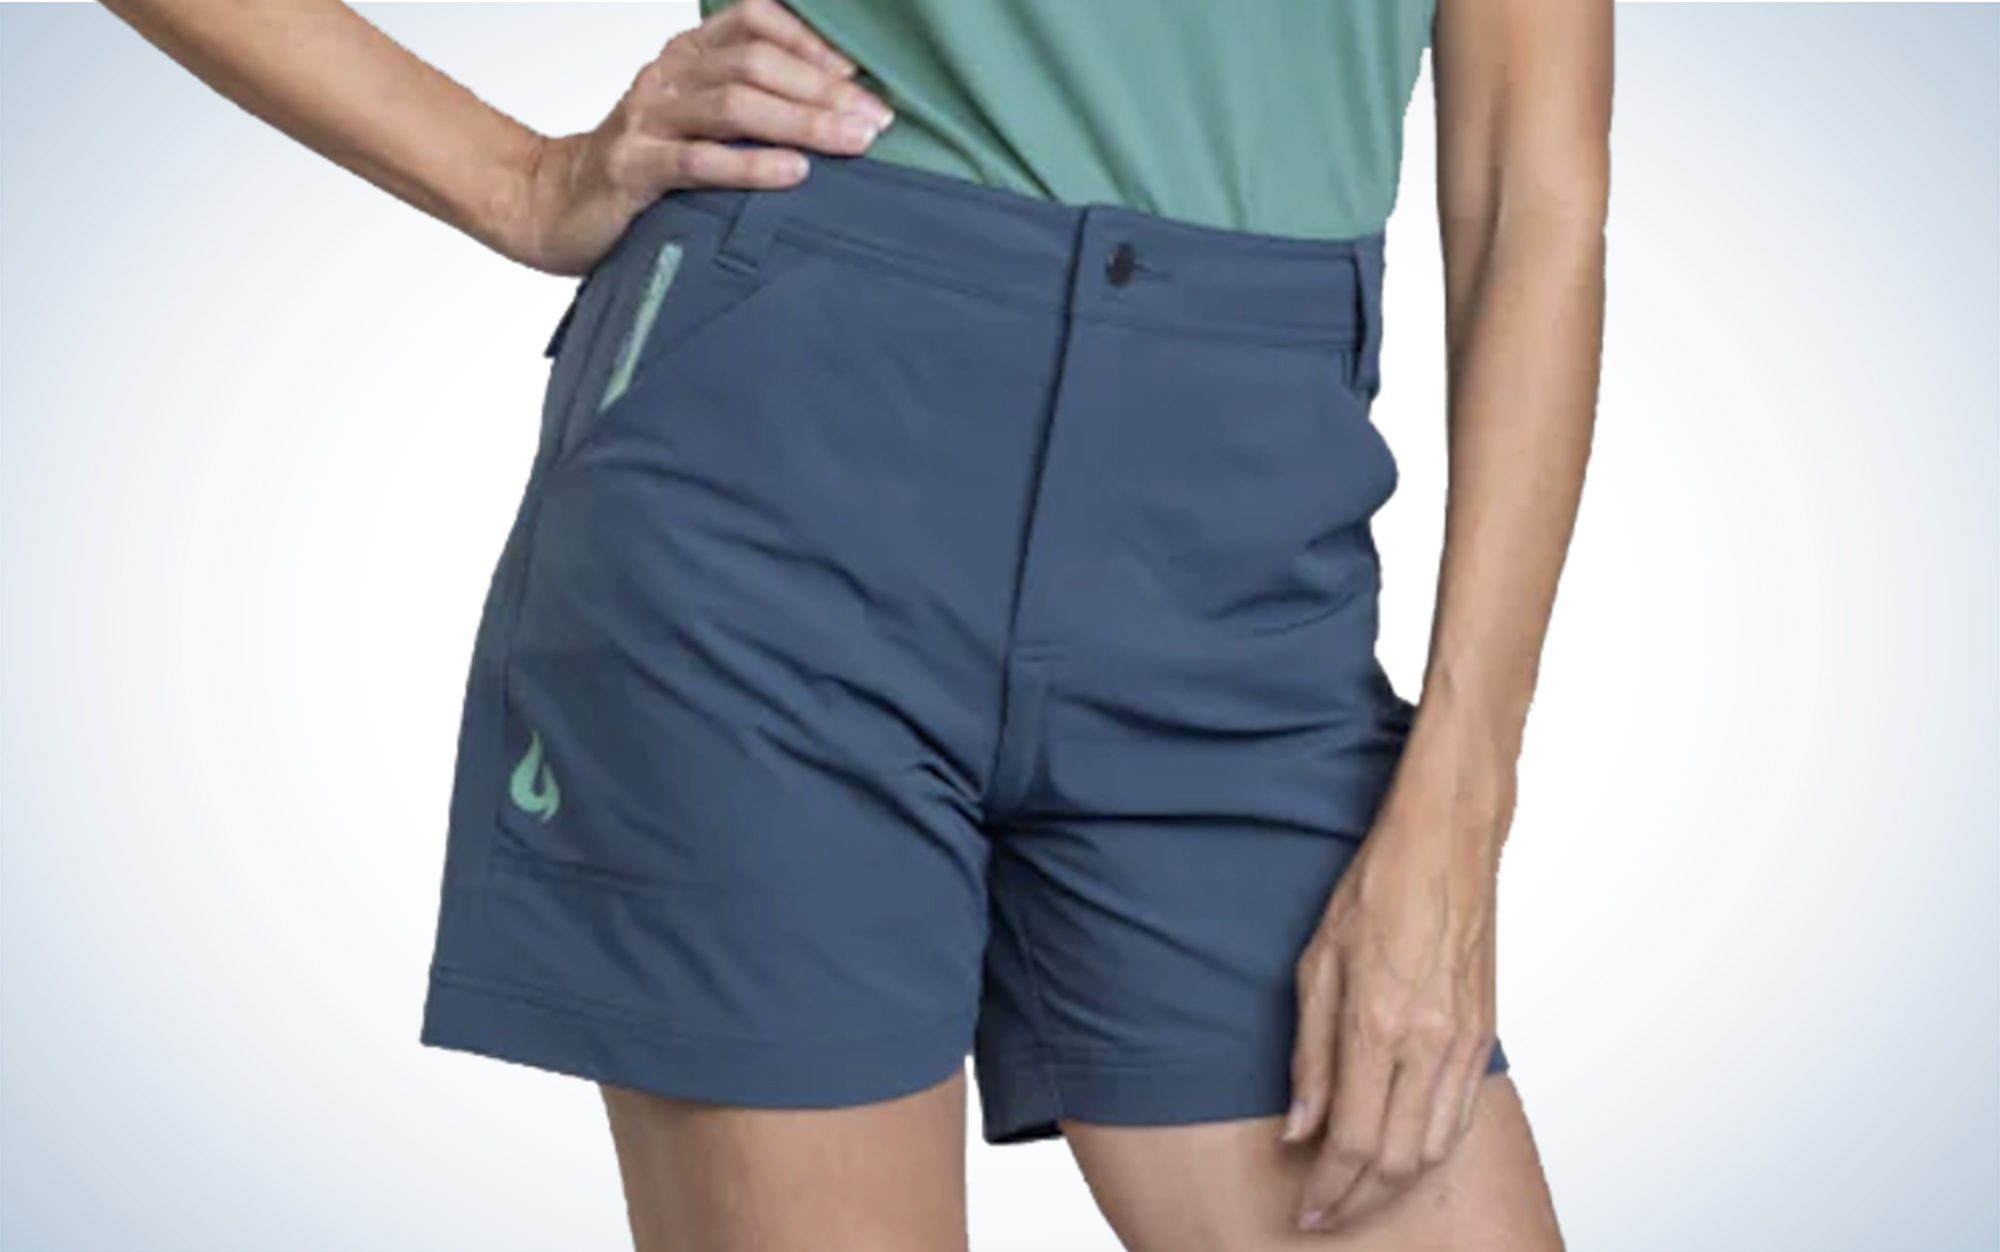 We tested the Gnara Go There Shorts.